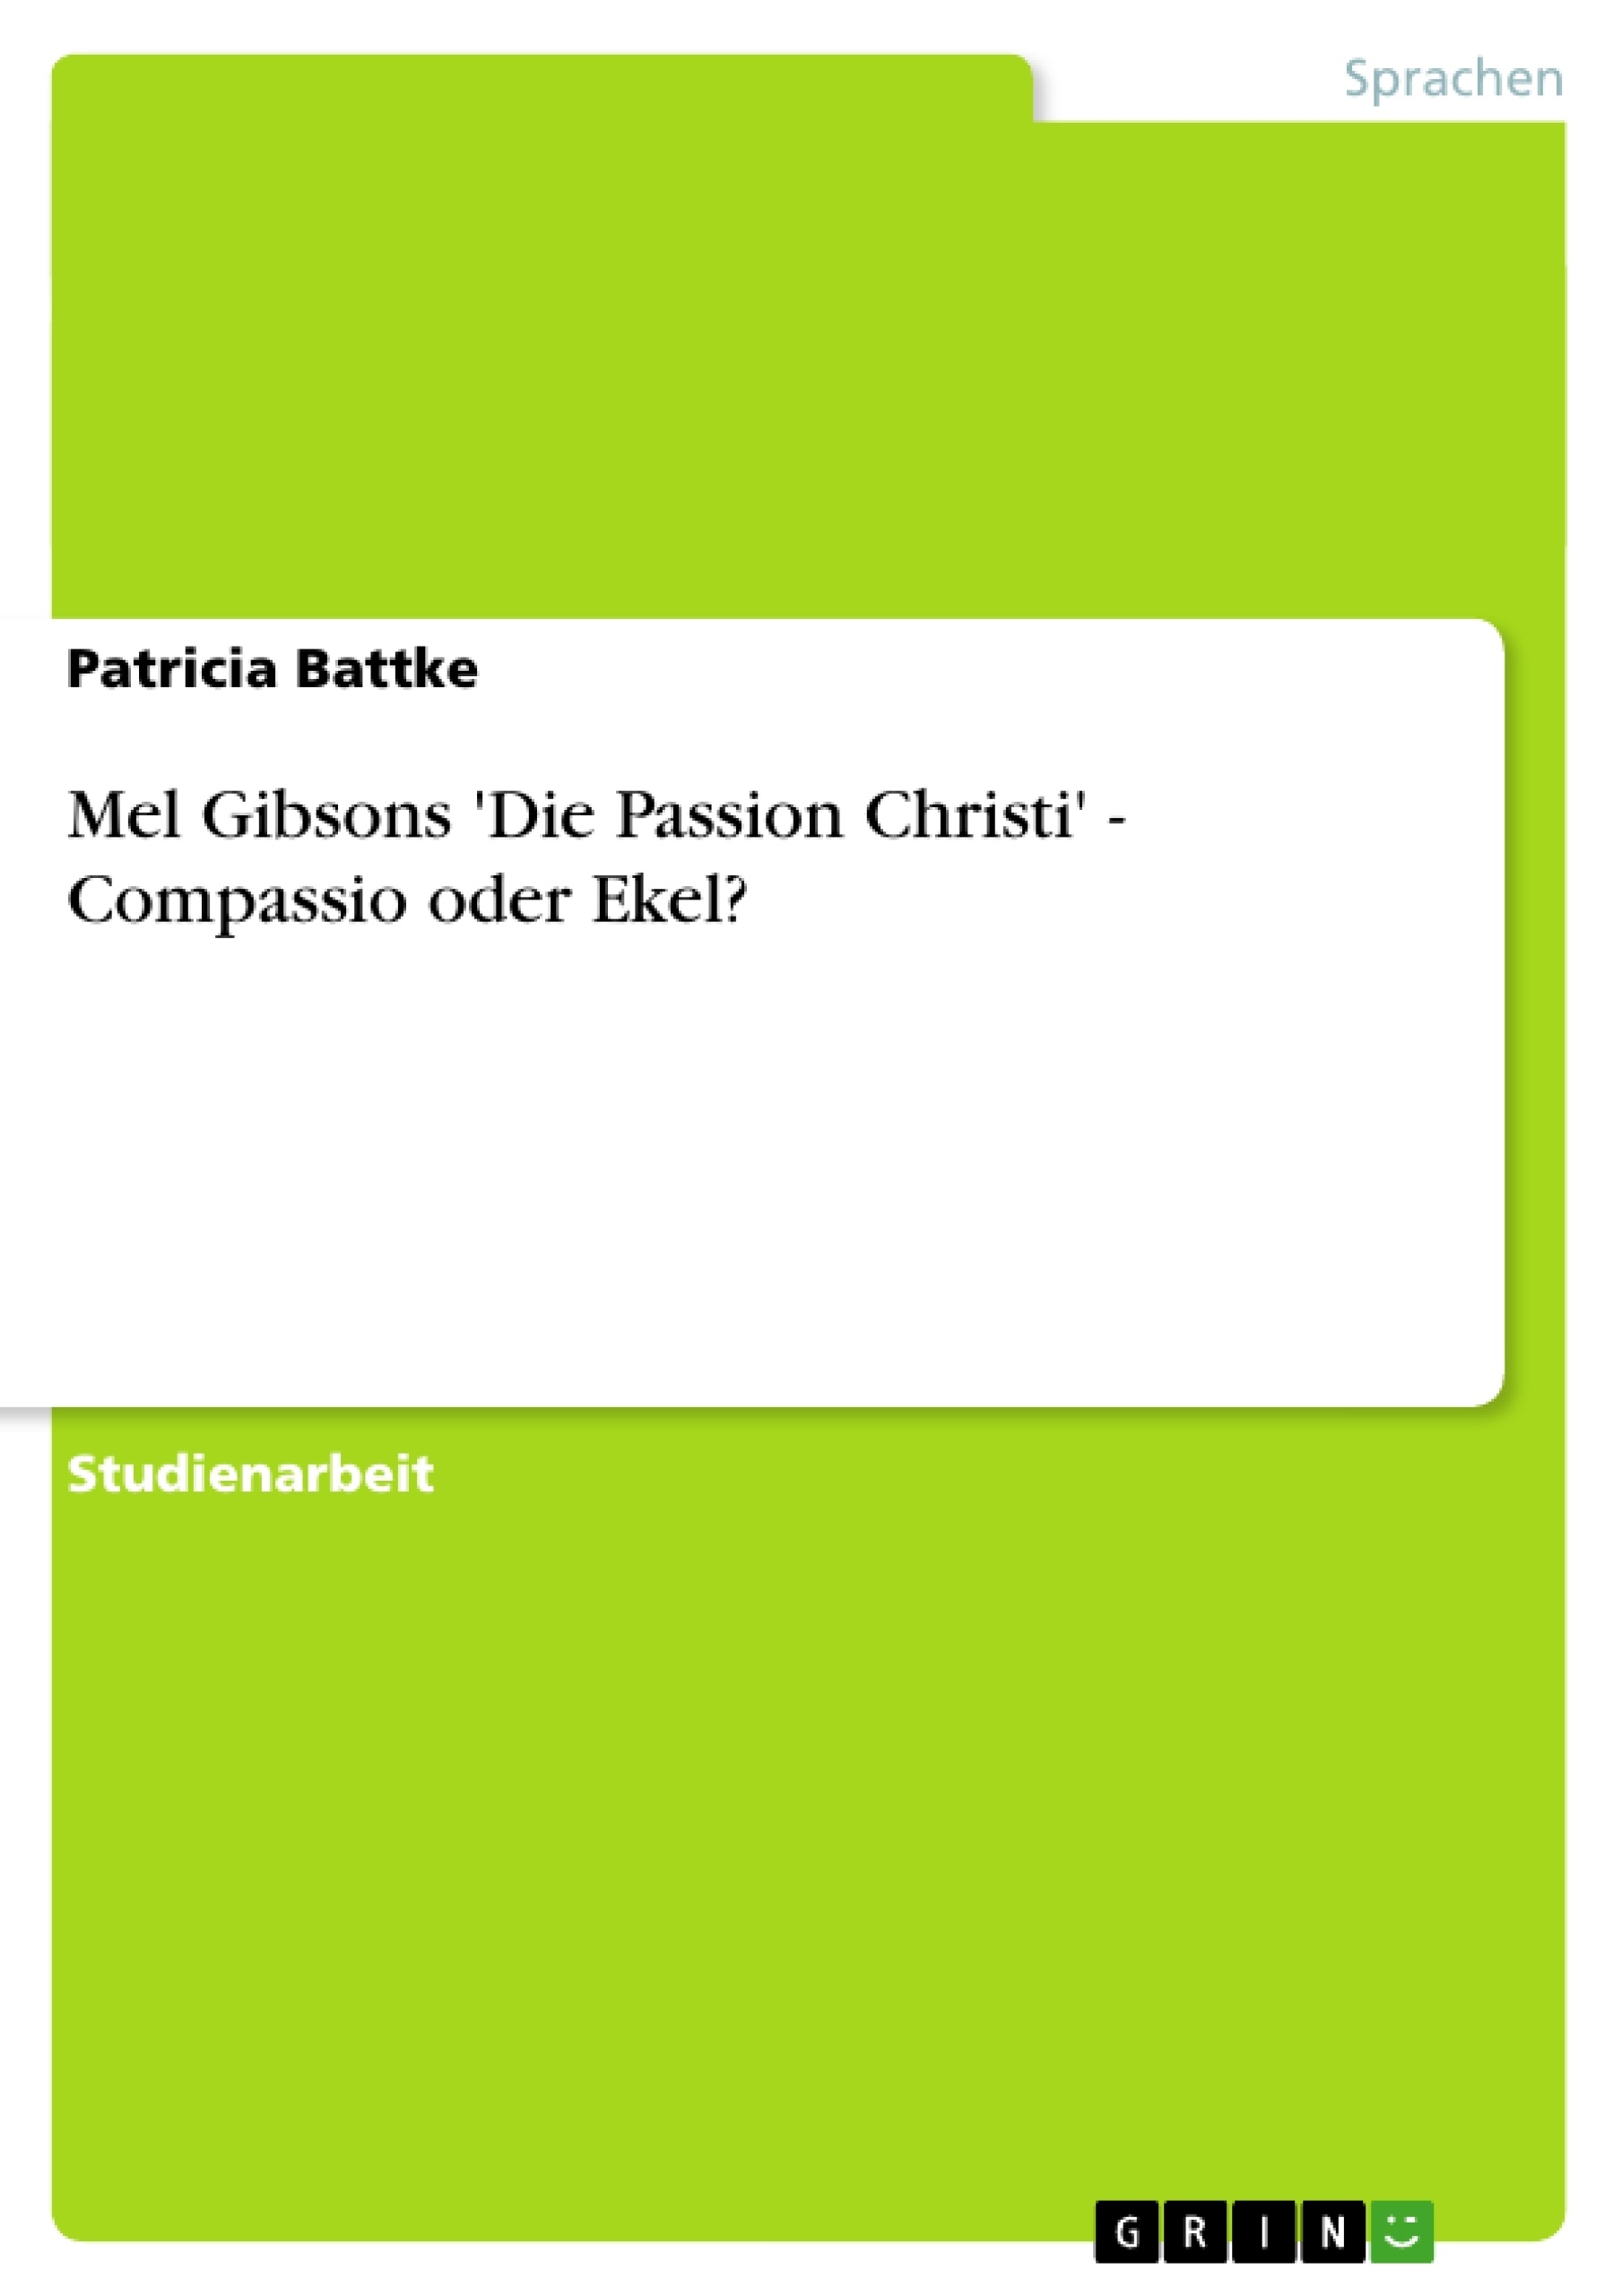 Titre: Mel Gibsons  'Die Passion Christi' - Compassio oder Ekel?